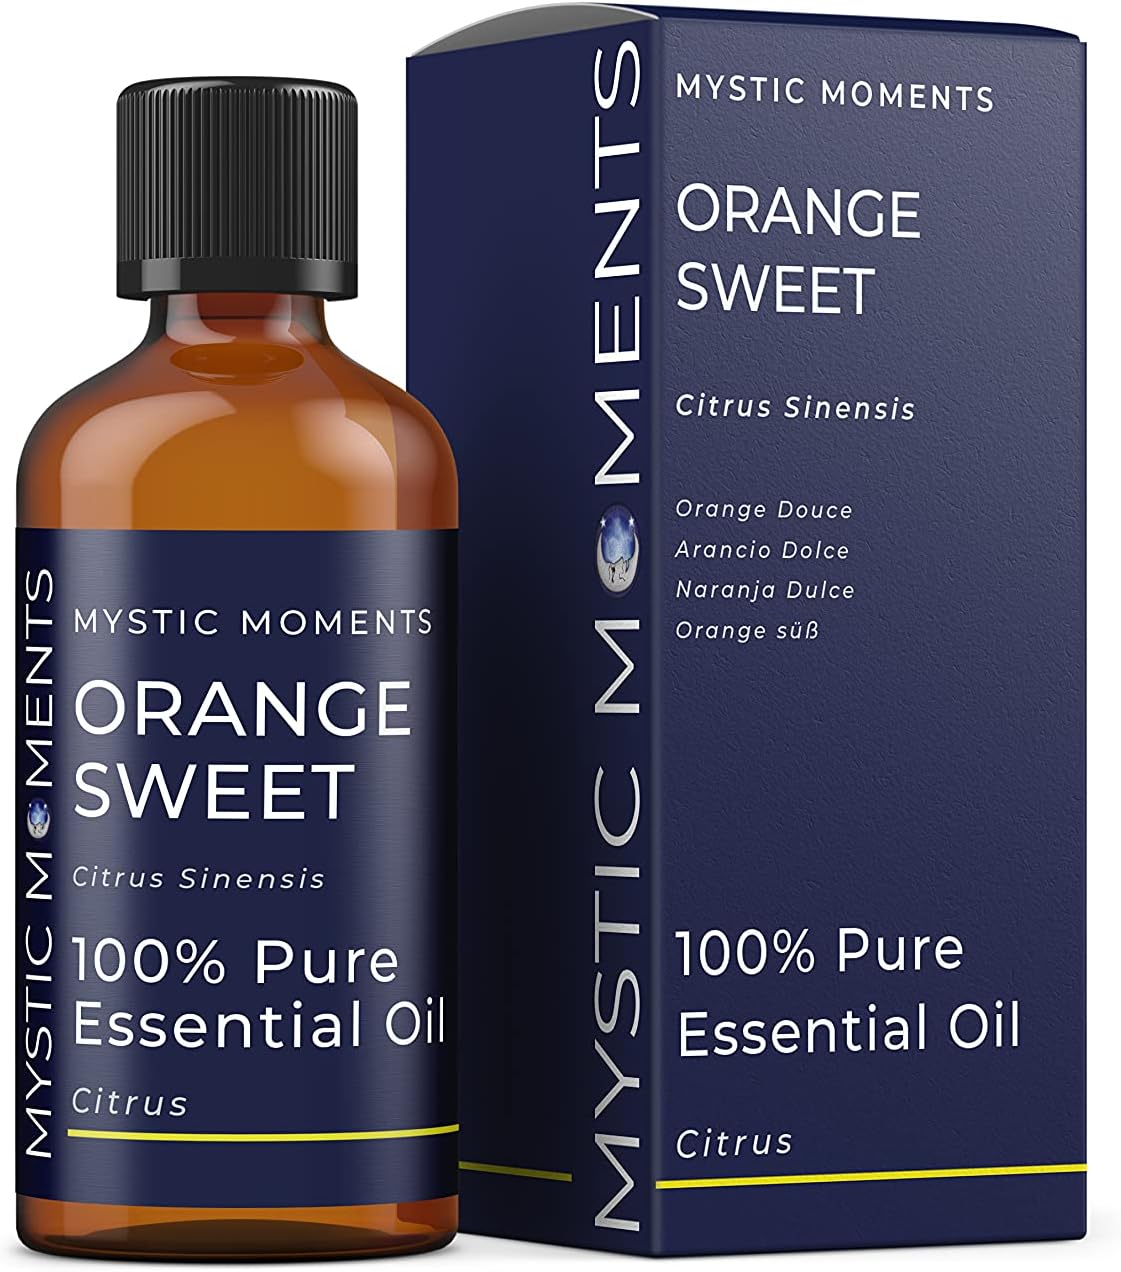 Mystic Moments | Orange Sweet Essential Oil 100ml - Pure & Natural oil for Diffusers, Aromatherapy & Massage Blends Vegan GMO Free